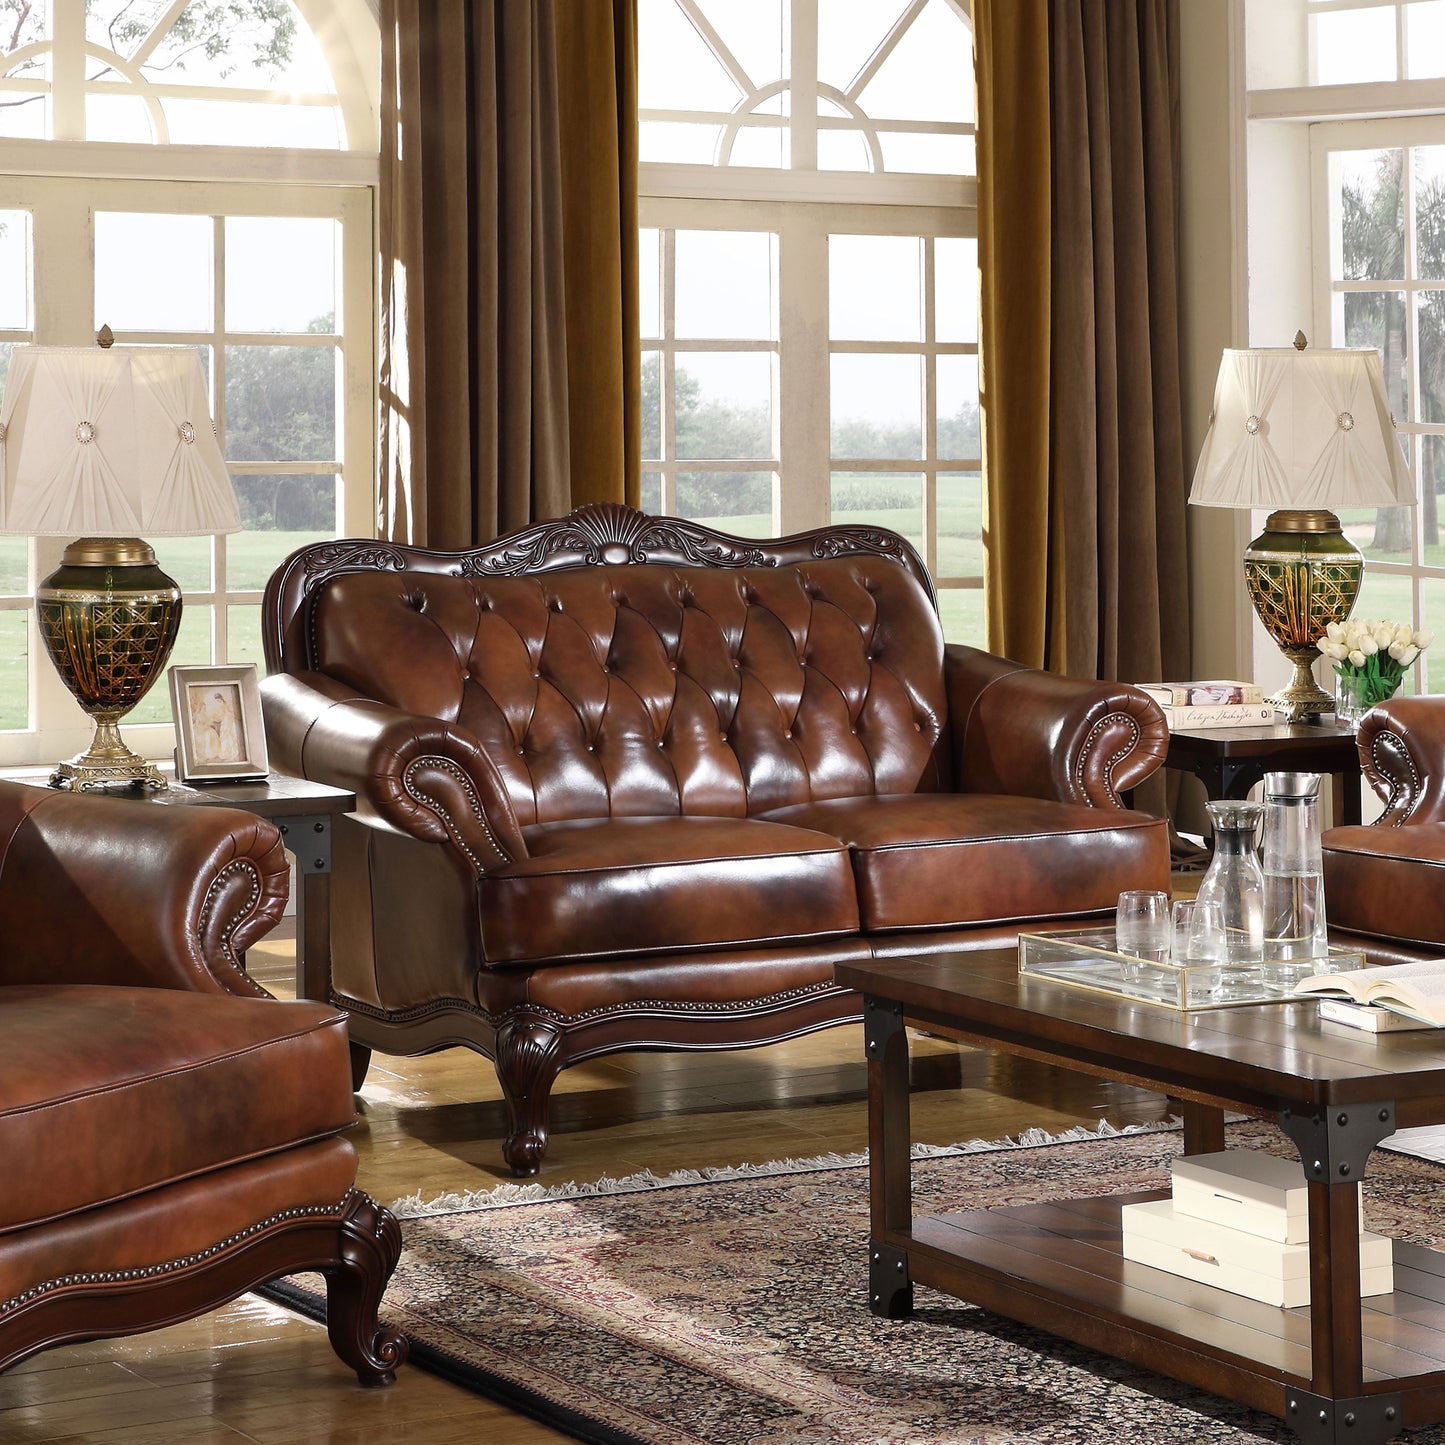 Victoria Tufted Back Loveseat Tri-tone and Brown